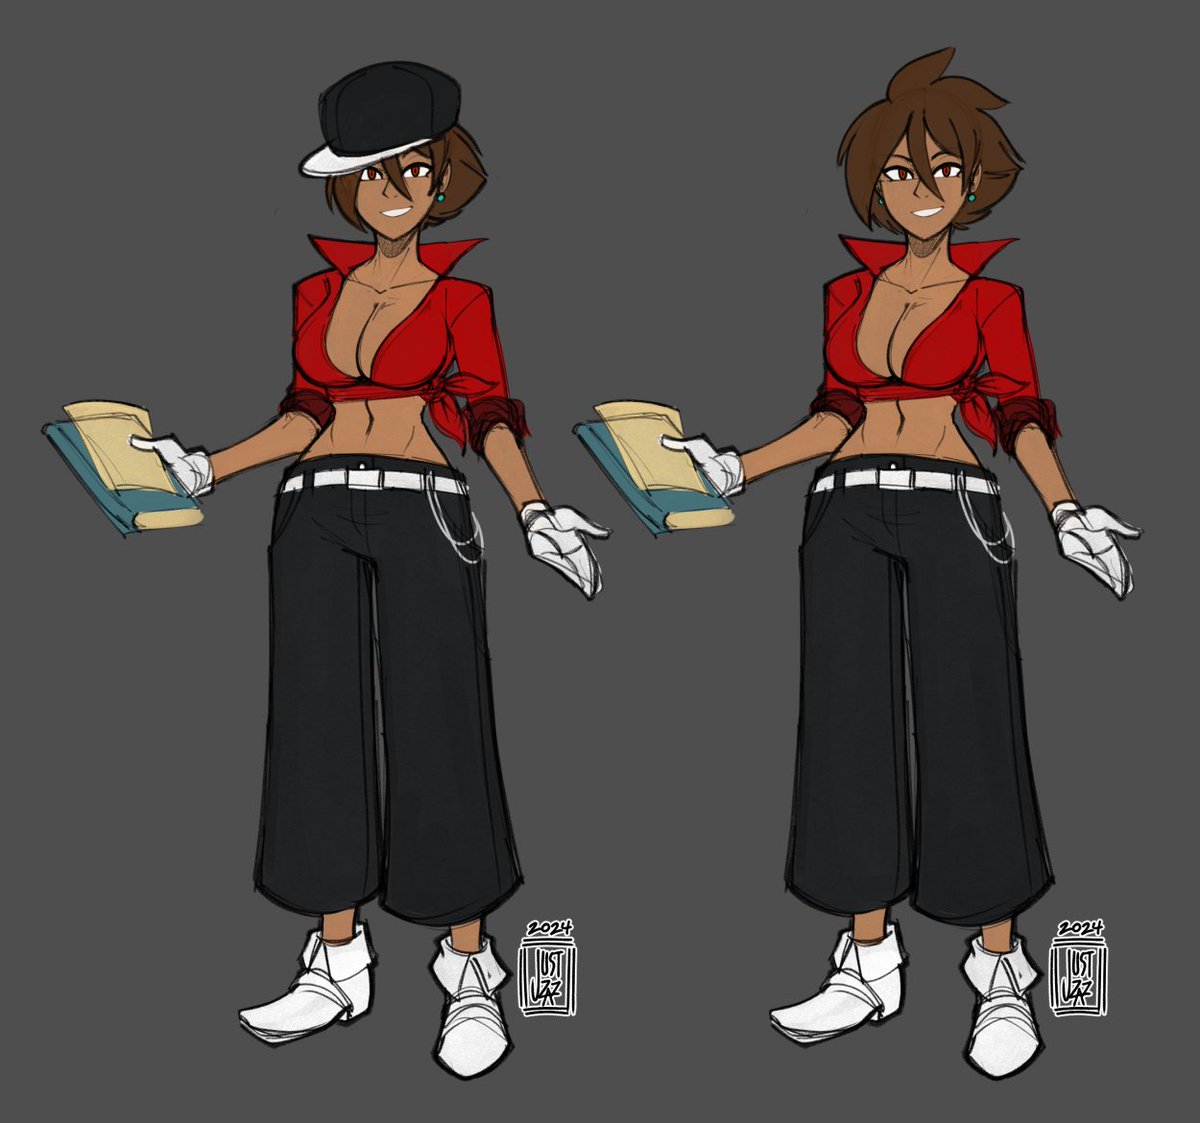 a bit more finalized. look at my idiot detective